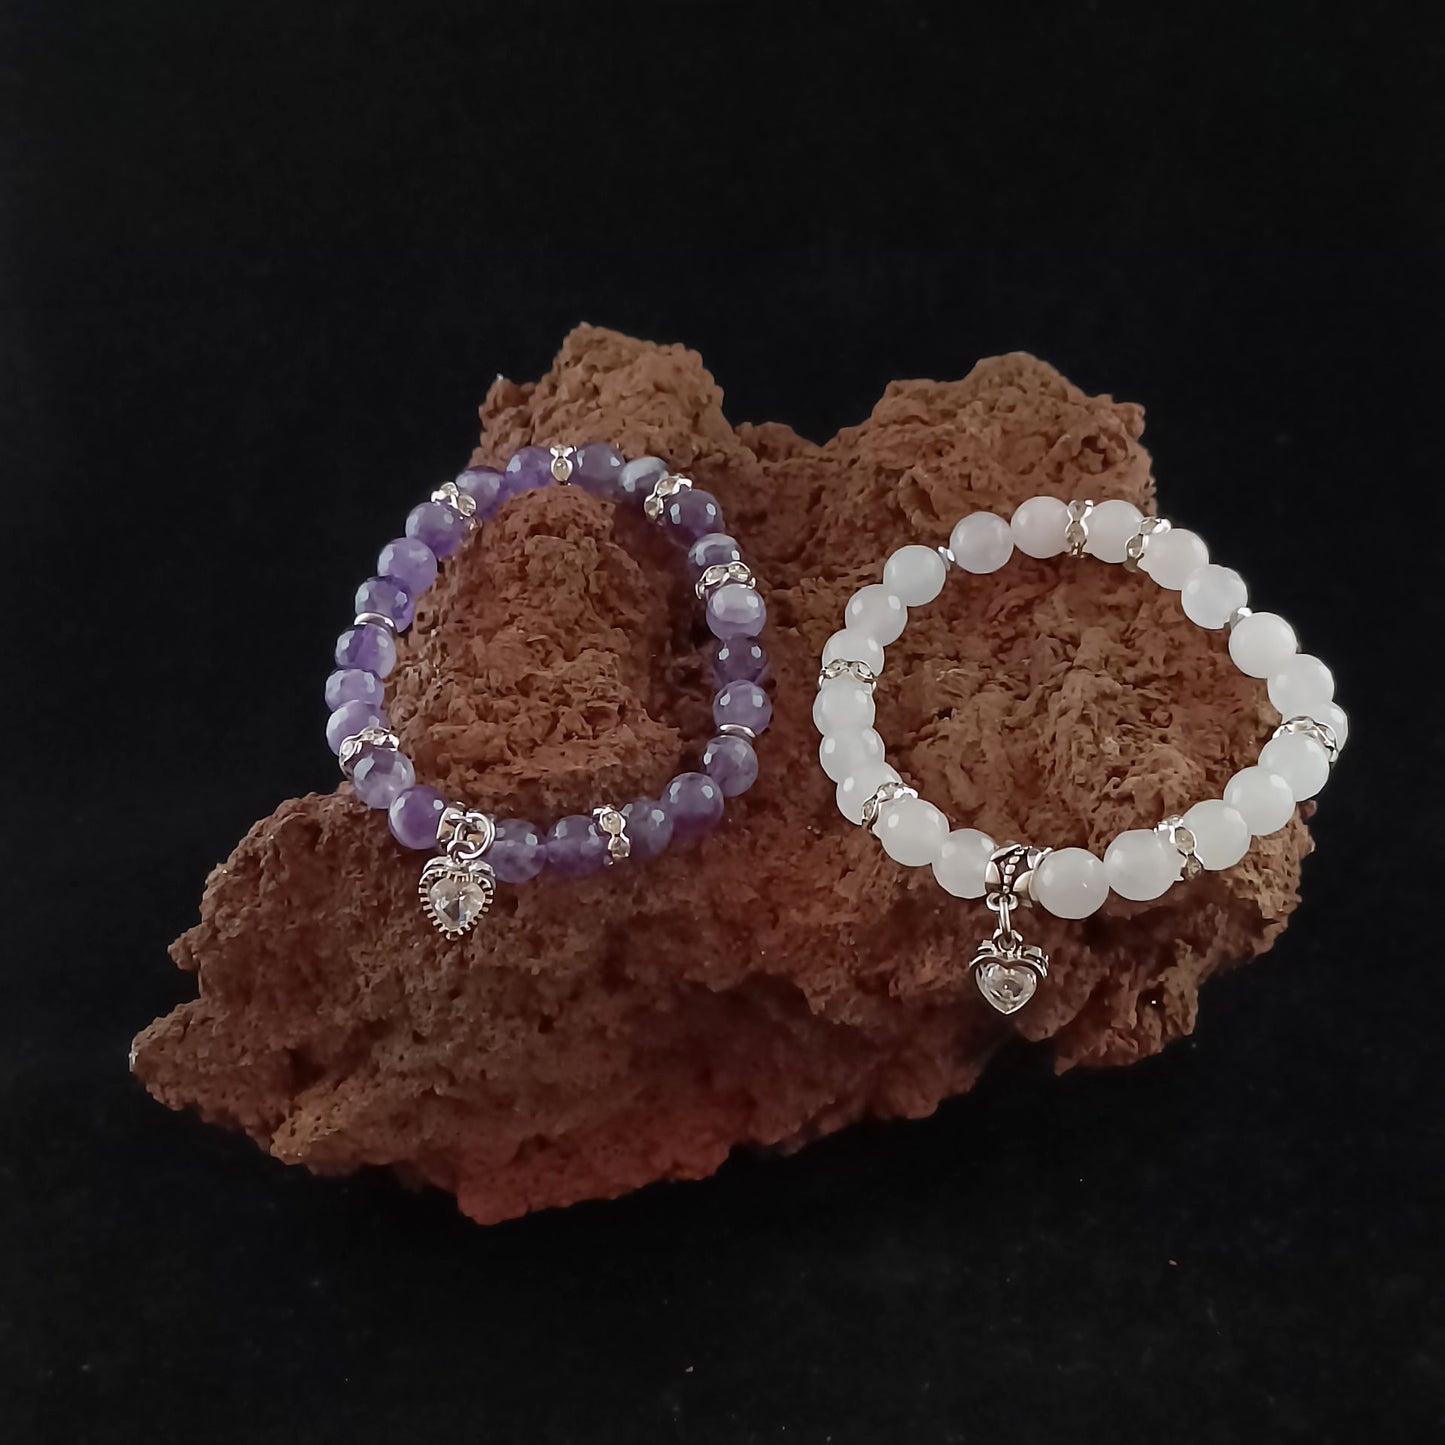 Two bright colored bracelets sitting on a dark red magma rock. On the left is a purple colored bracelet with a bright silver colored glass heart in the center. On the right is a bright pinkish beads bracelet with a heart centerpiece charm.